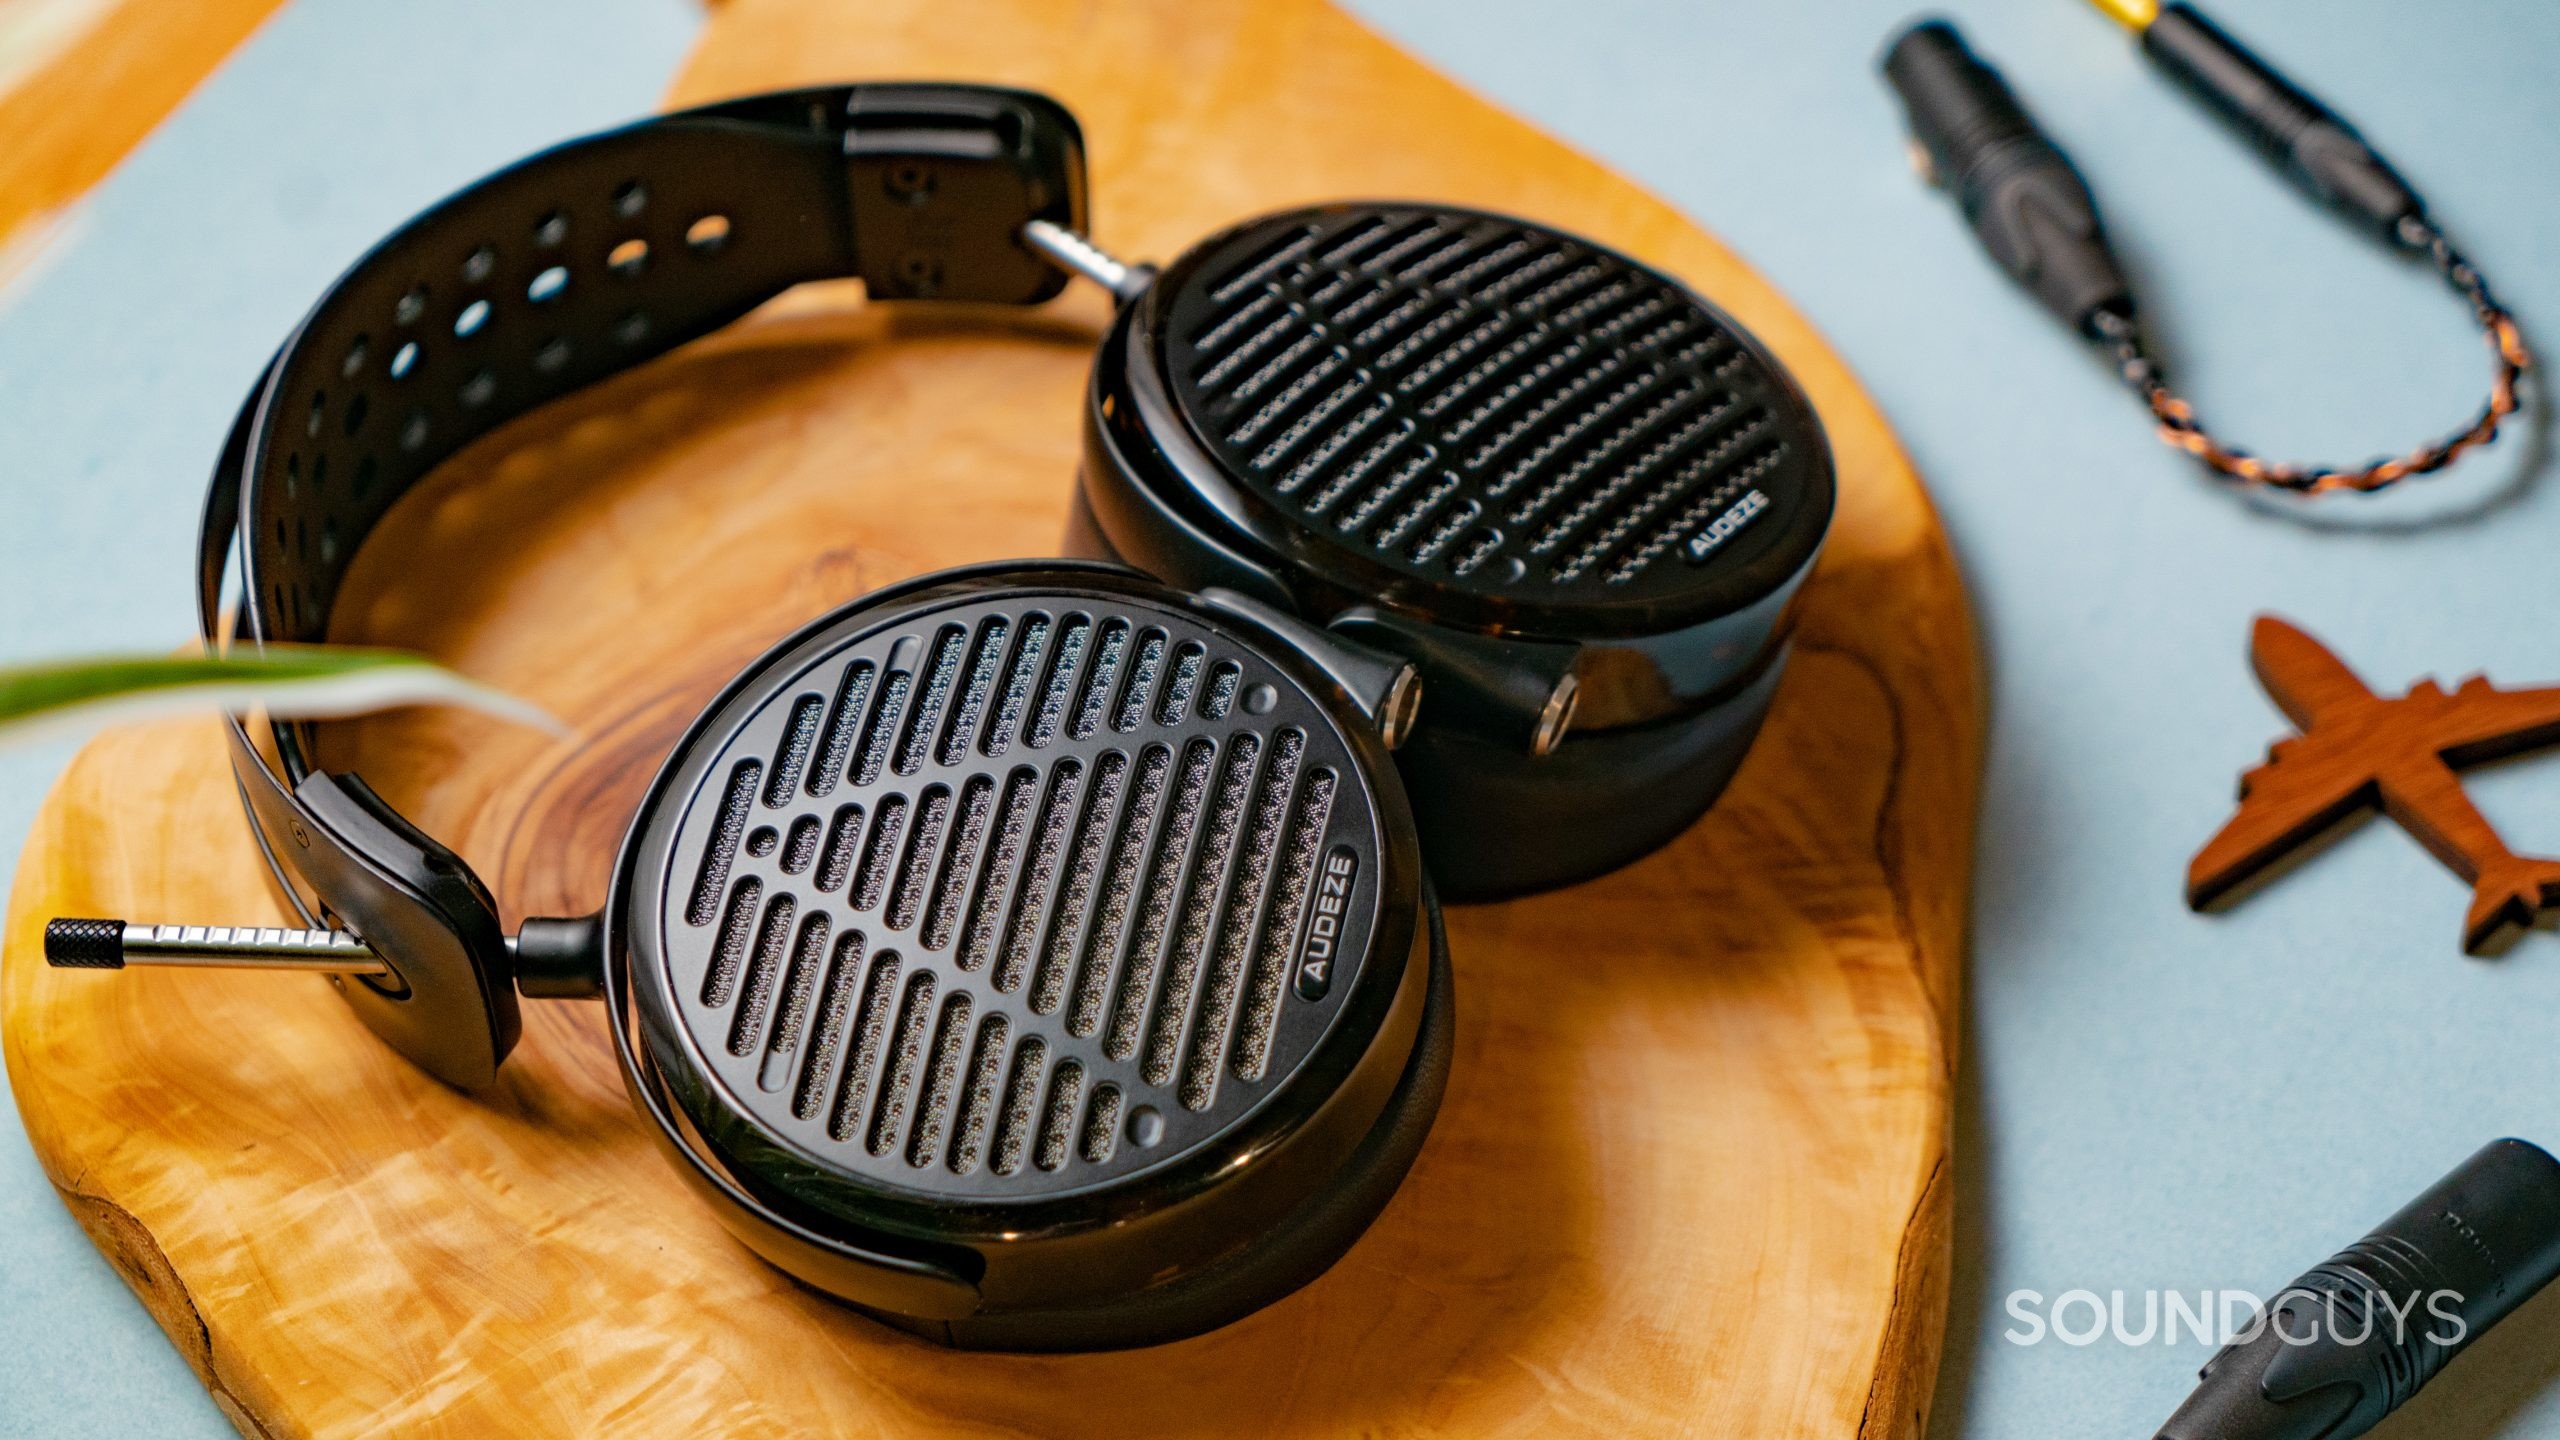 Audeze LCD-5 showing the grilles on the faces of the open back ear cups.